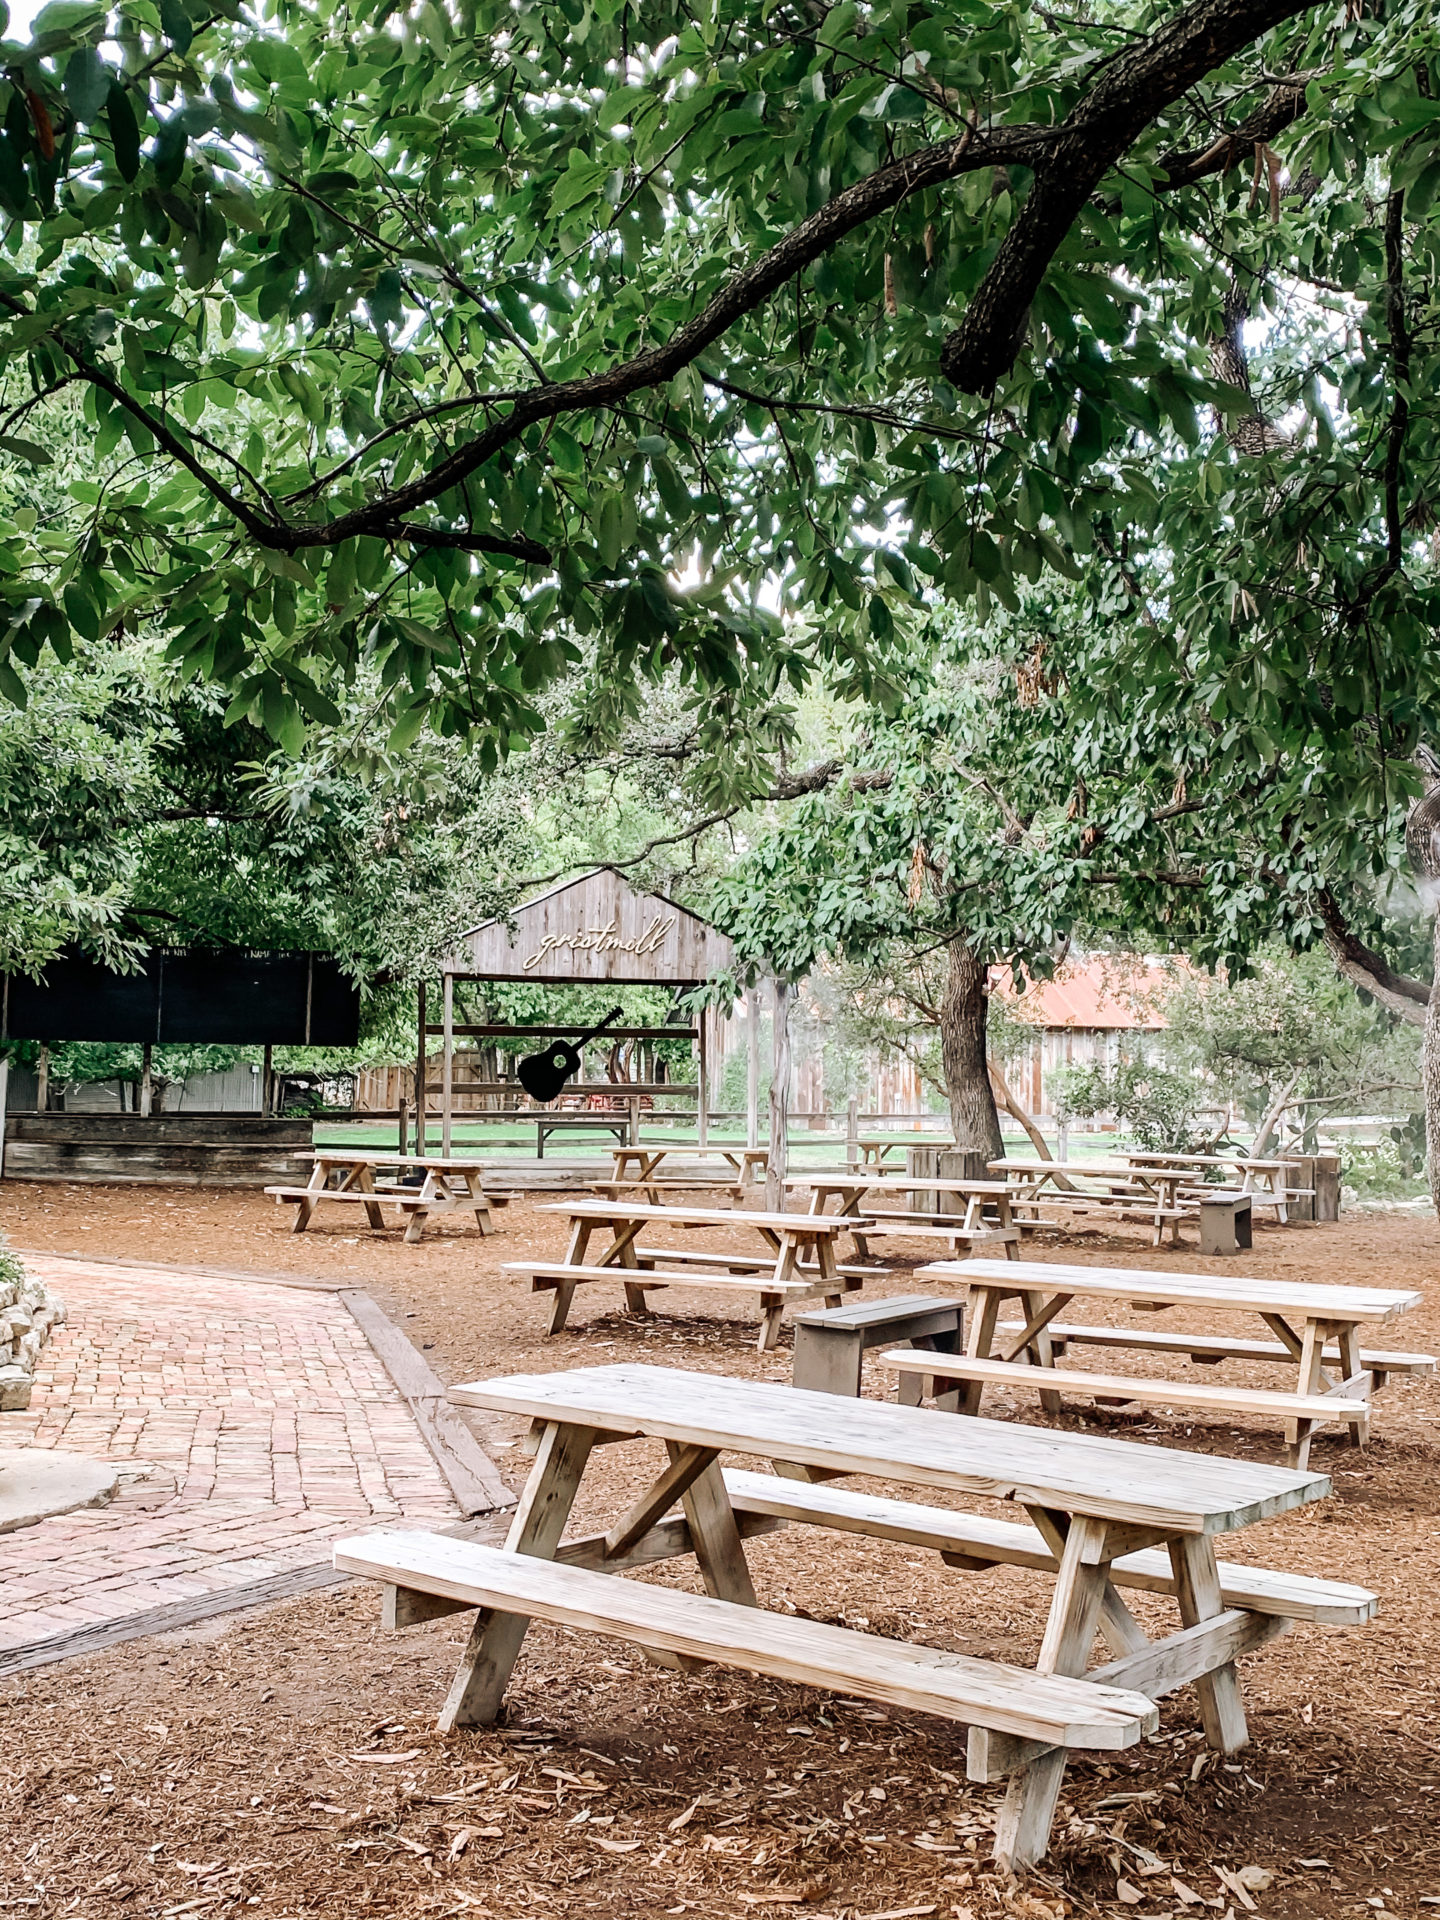 hill country texas things to do